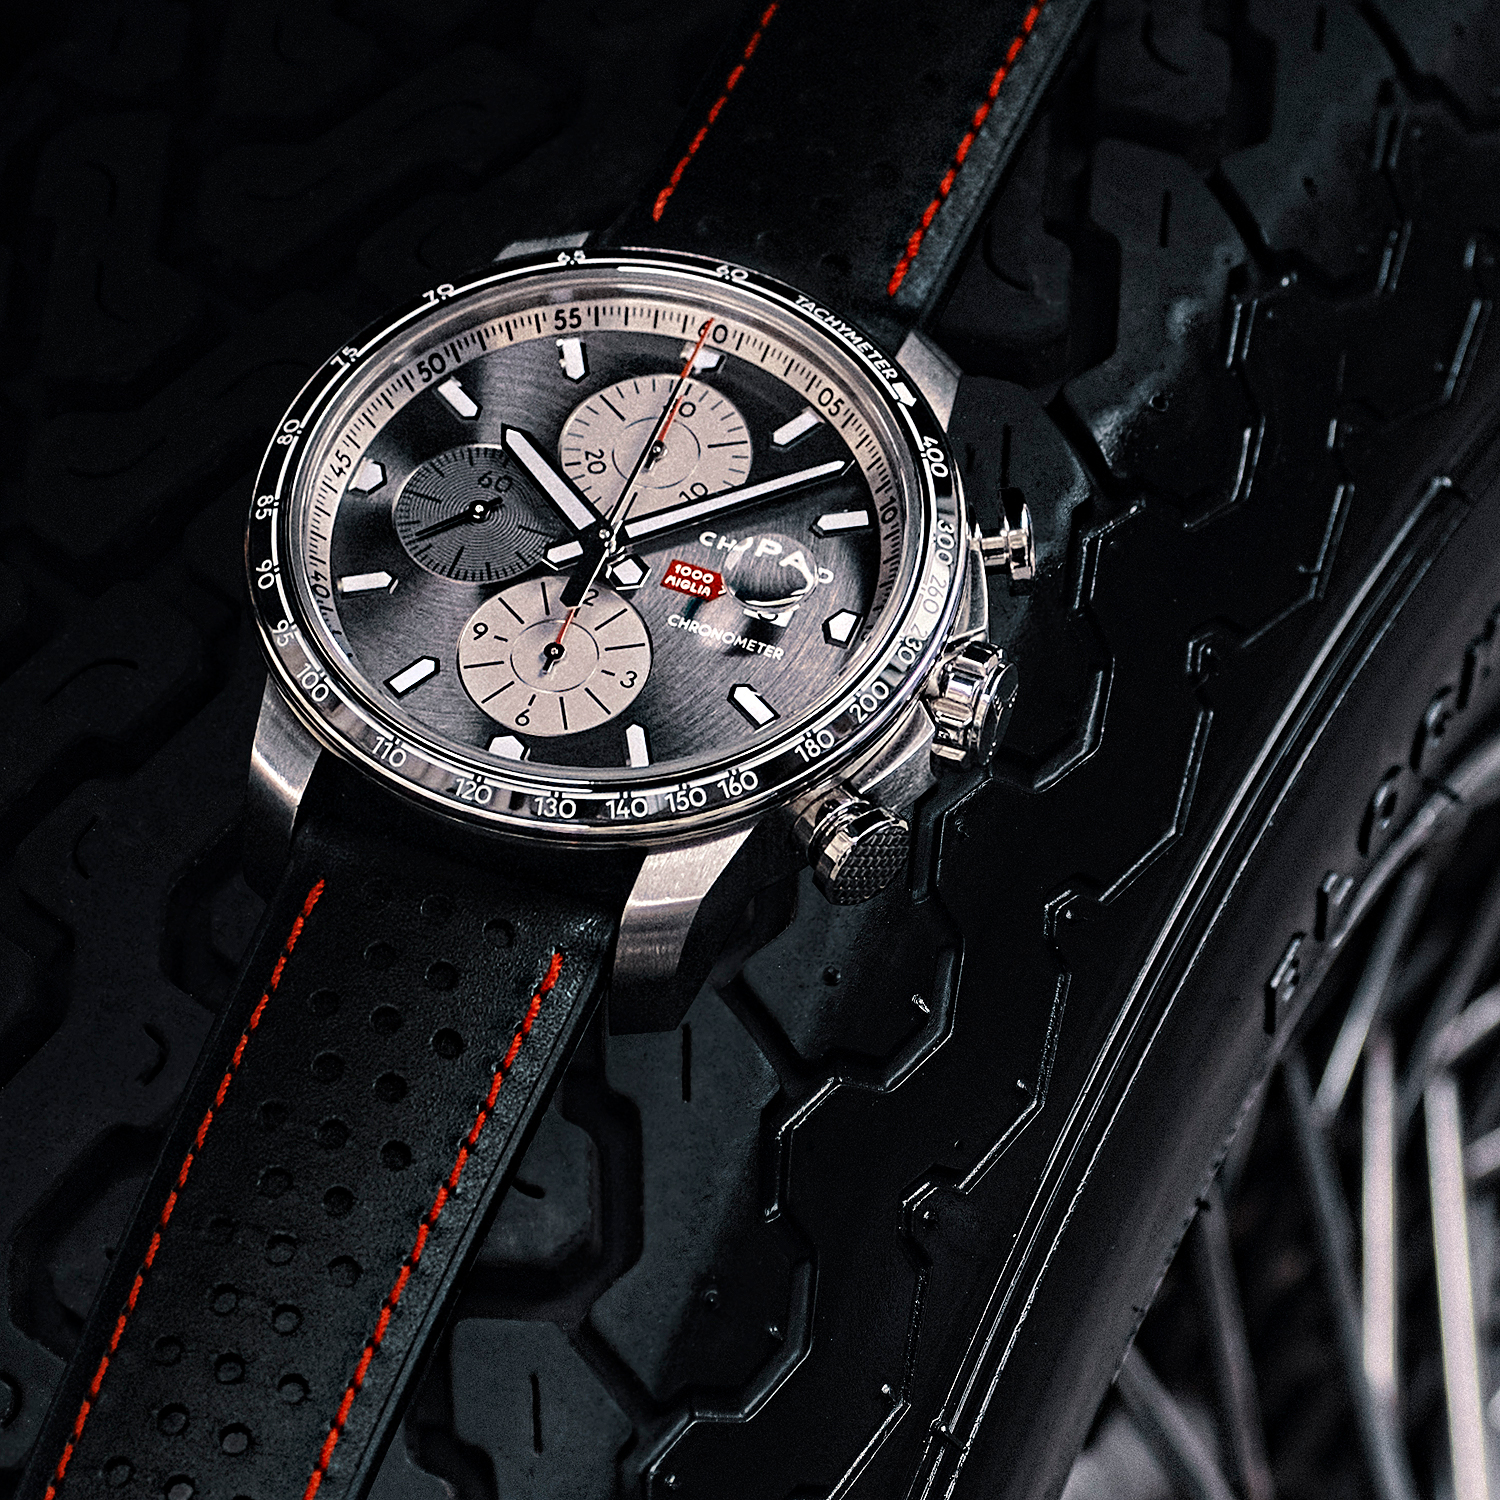 Racing Back In Time With Chopard At The 2022 Mille Miglia